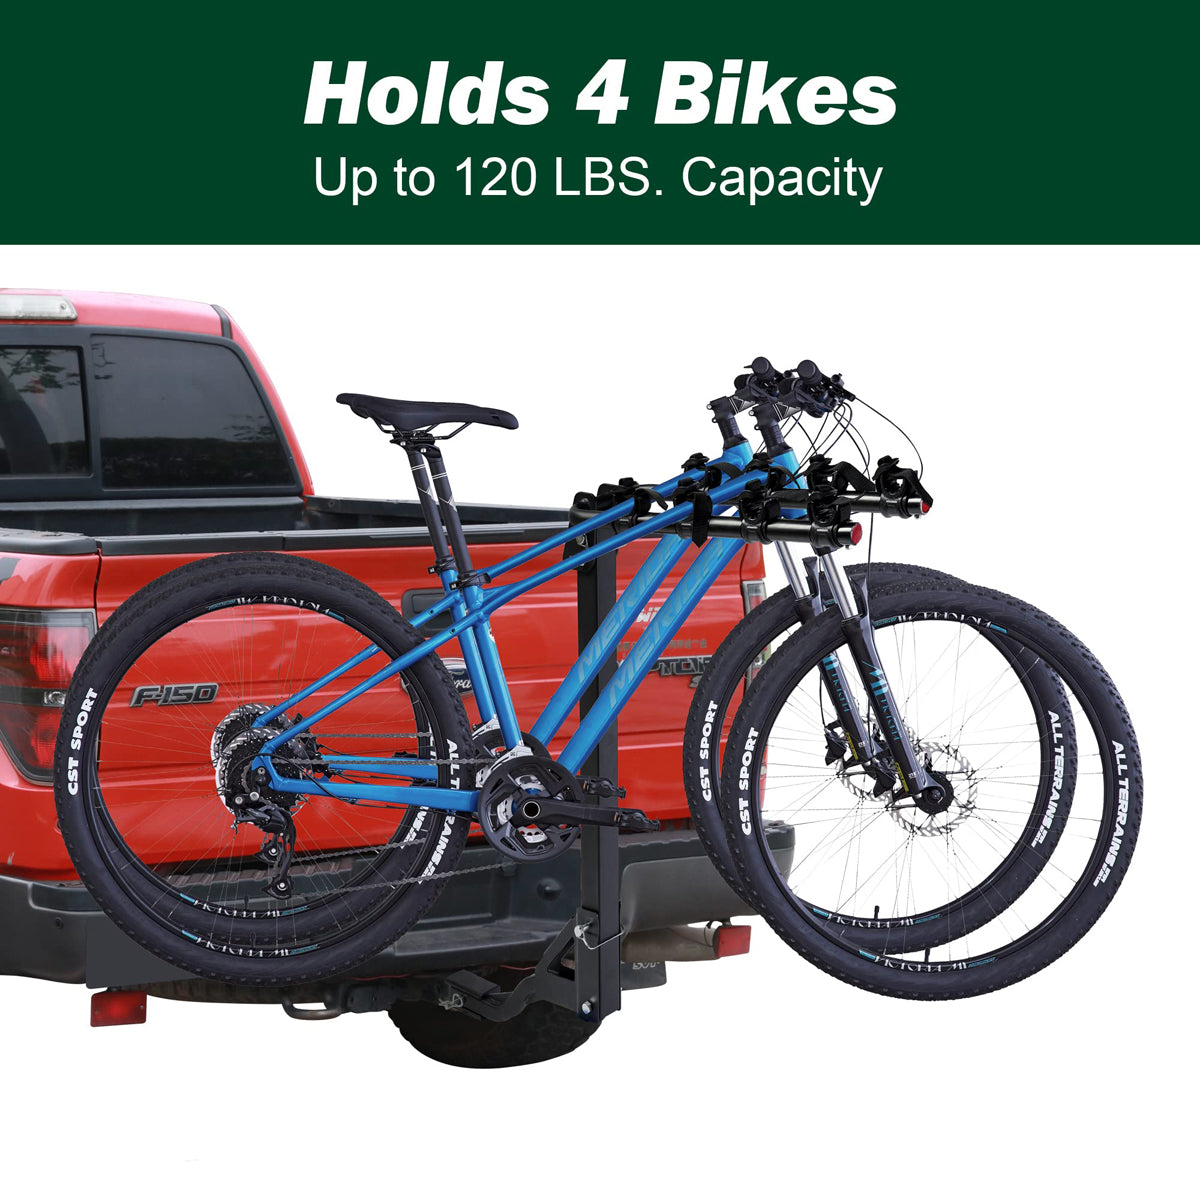 Hold 4 Bikes Up To 120 LBS. Capacity